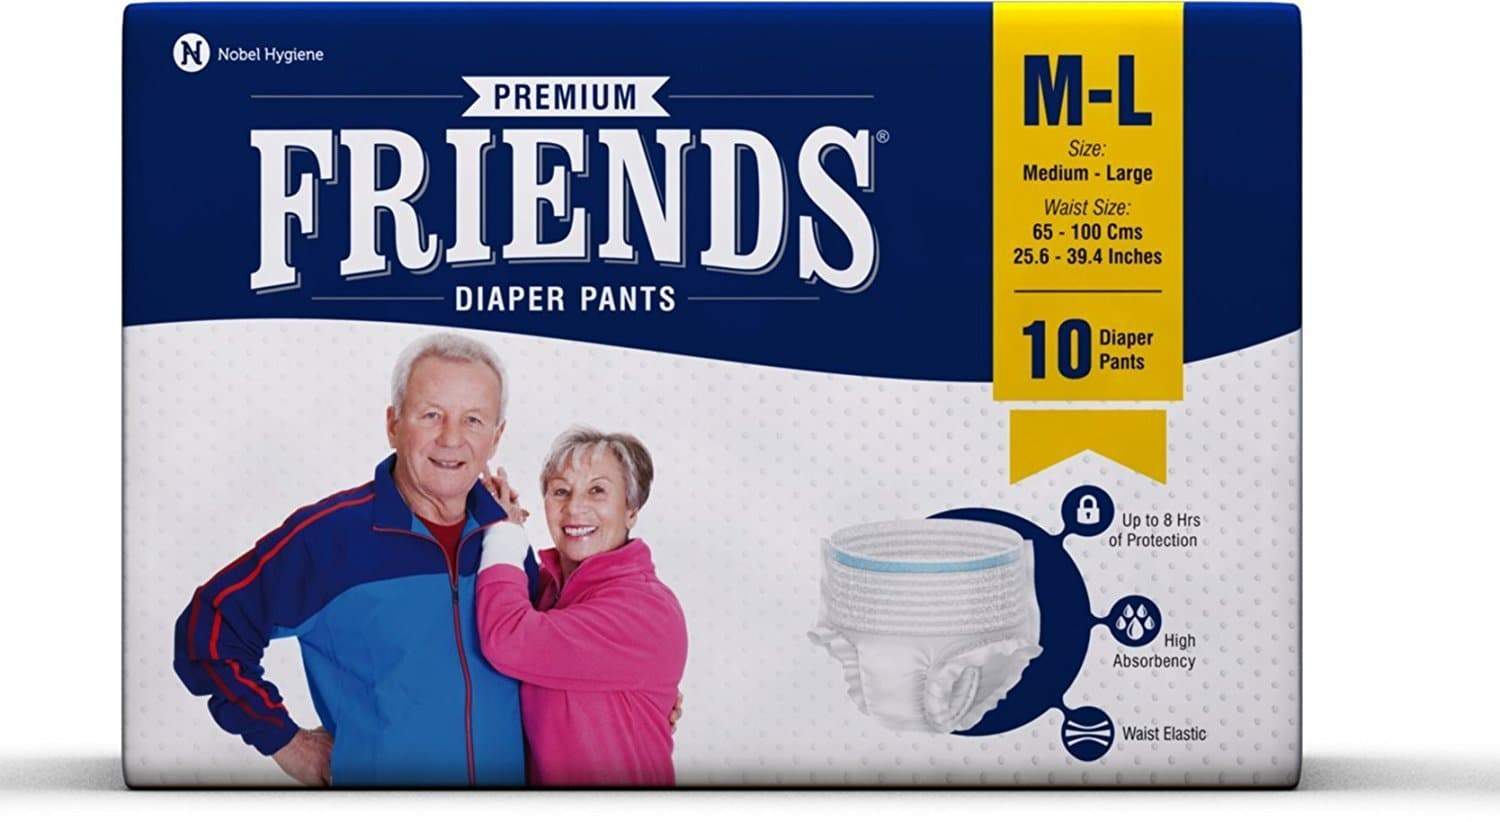 Buy original Friends Pullup Adult Diapers (M-L) for Rs. 545.44